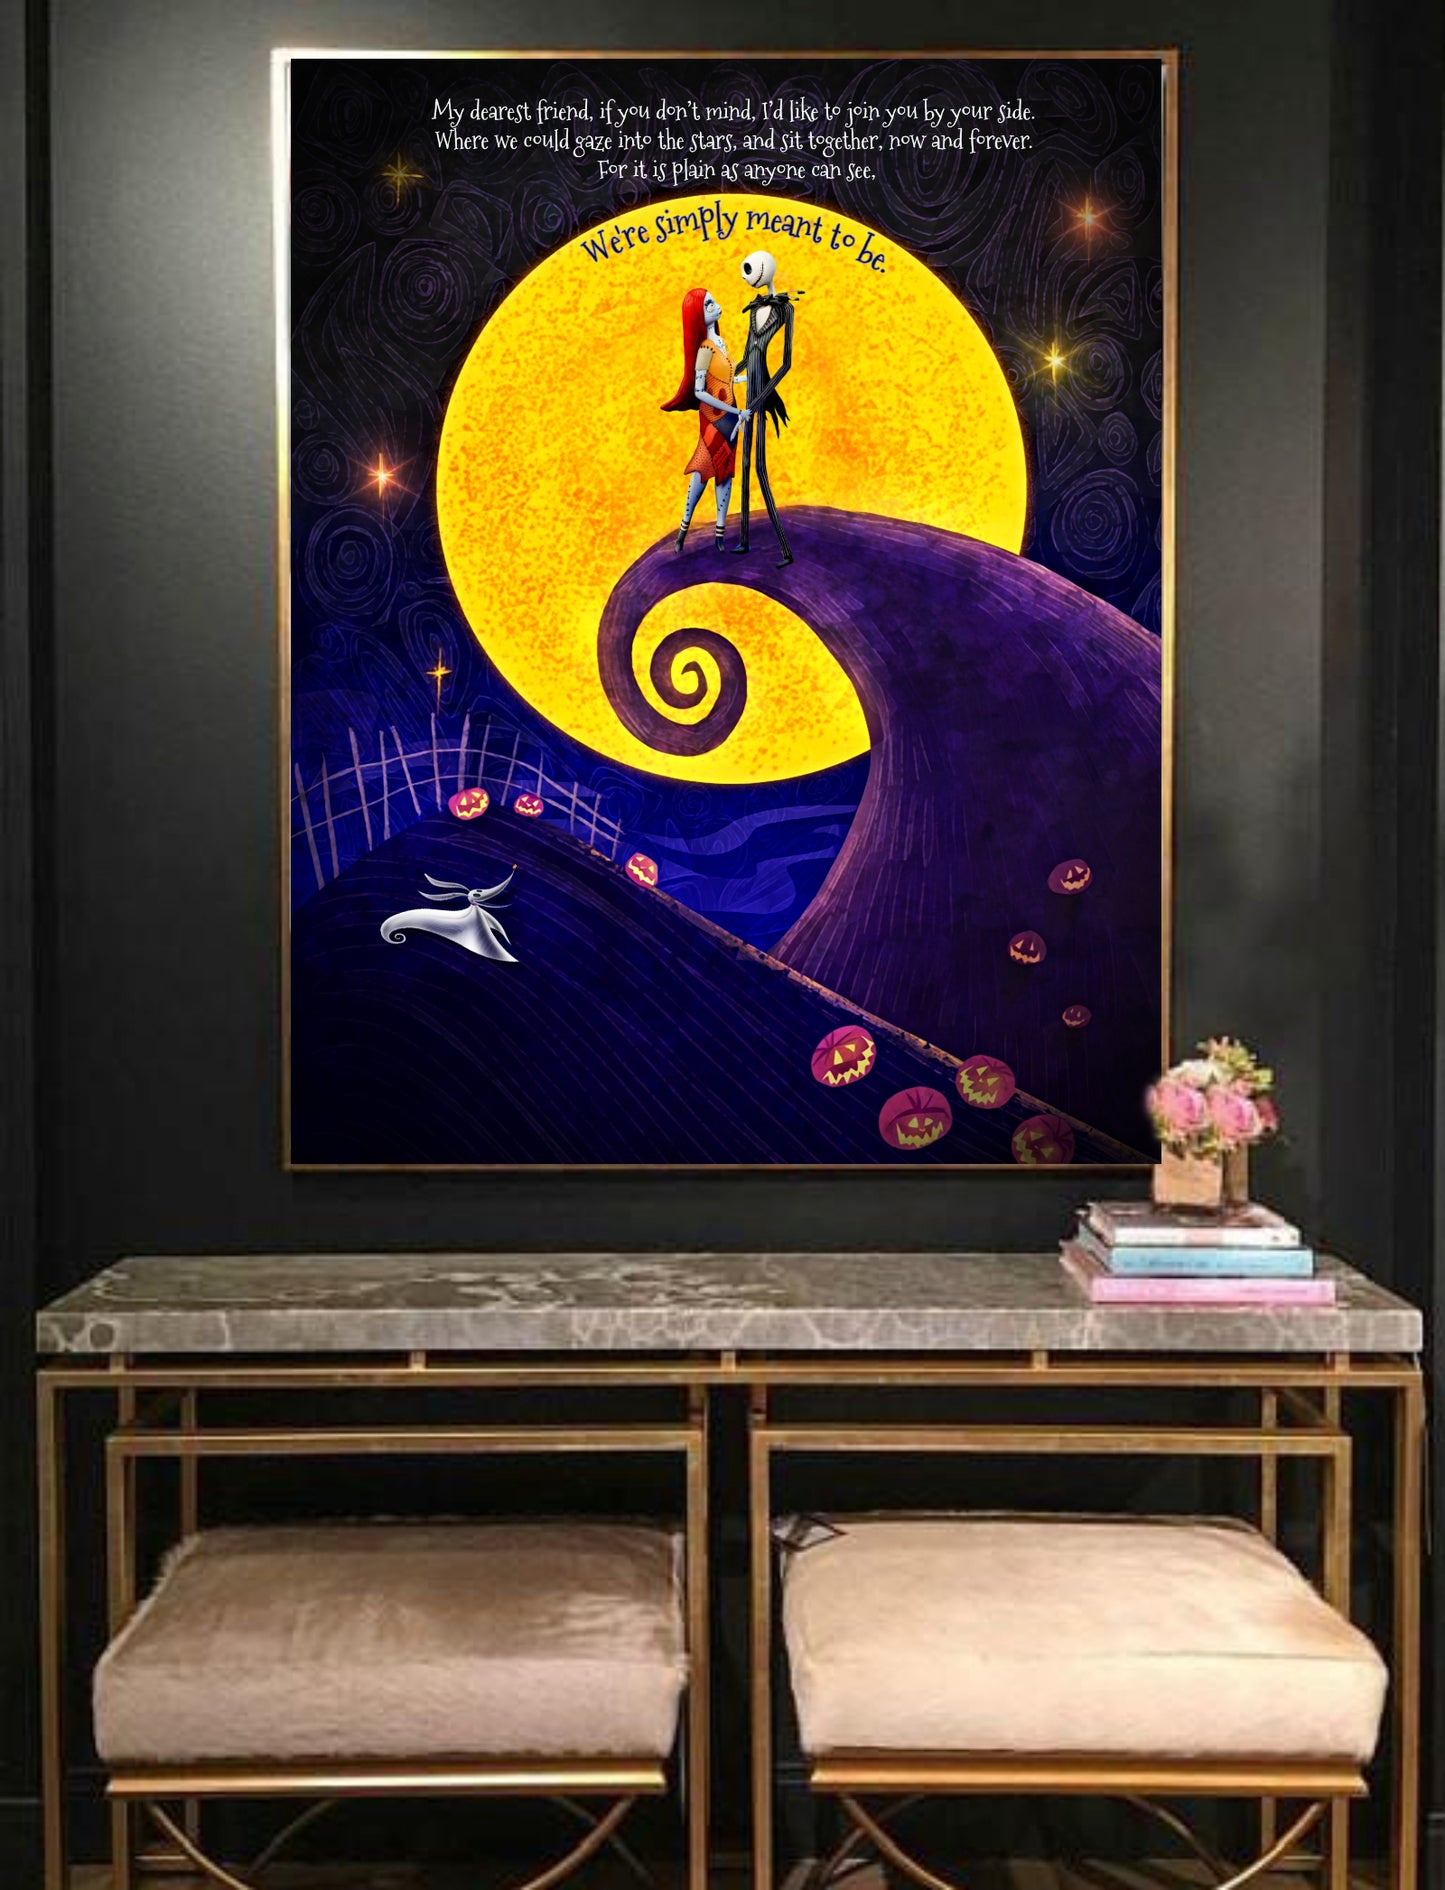 Nightmare Before Christmas Simply meant to be anniversary gift